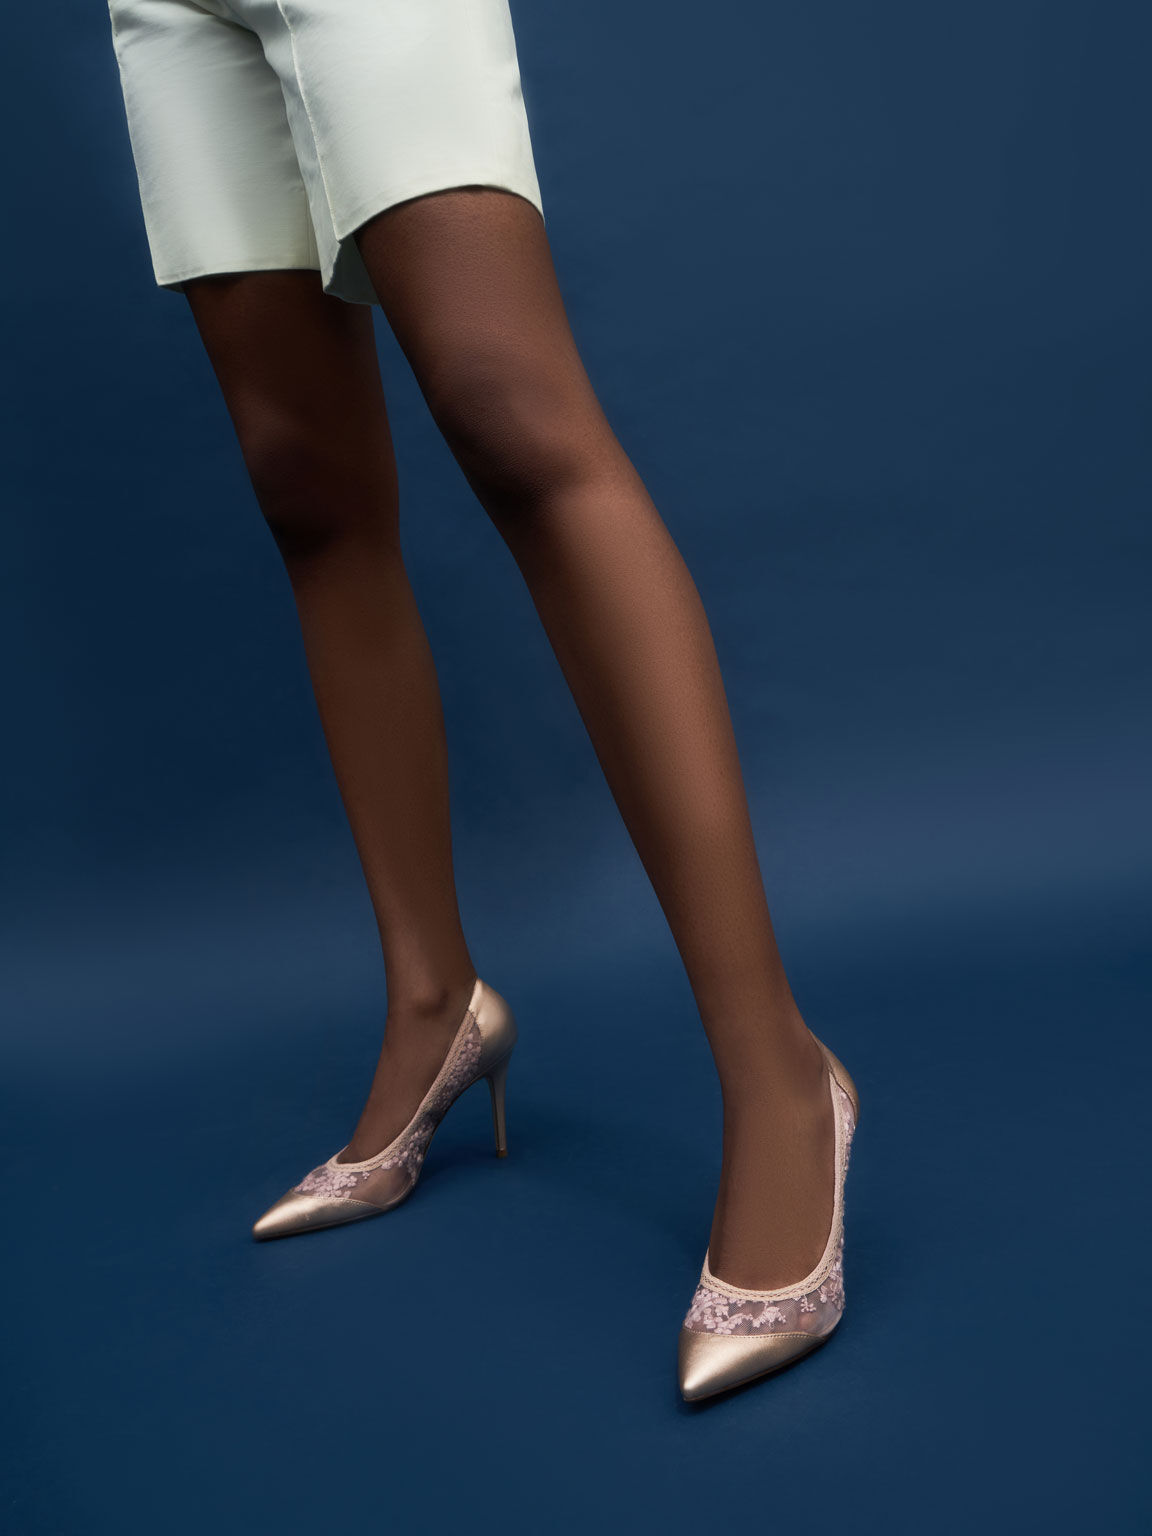 Embroidered Mesh Pointed Pumps, Rose Gold, hi-res